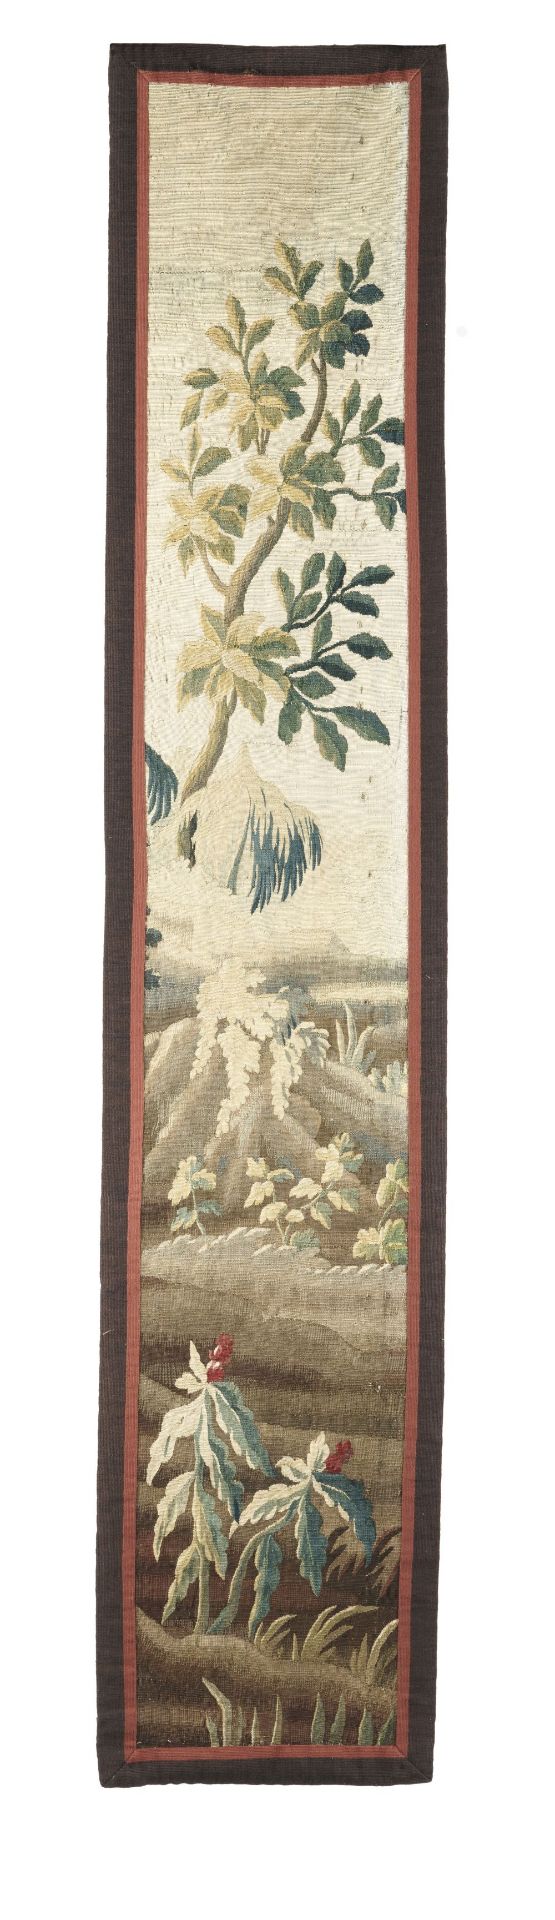 A TAPESTRY FRAGMENT 18th century